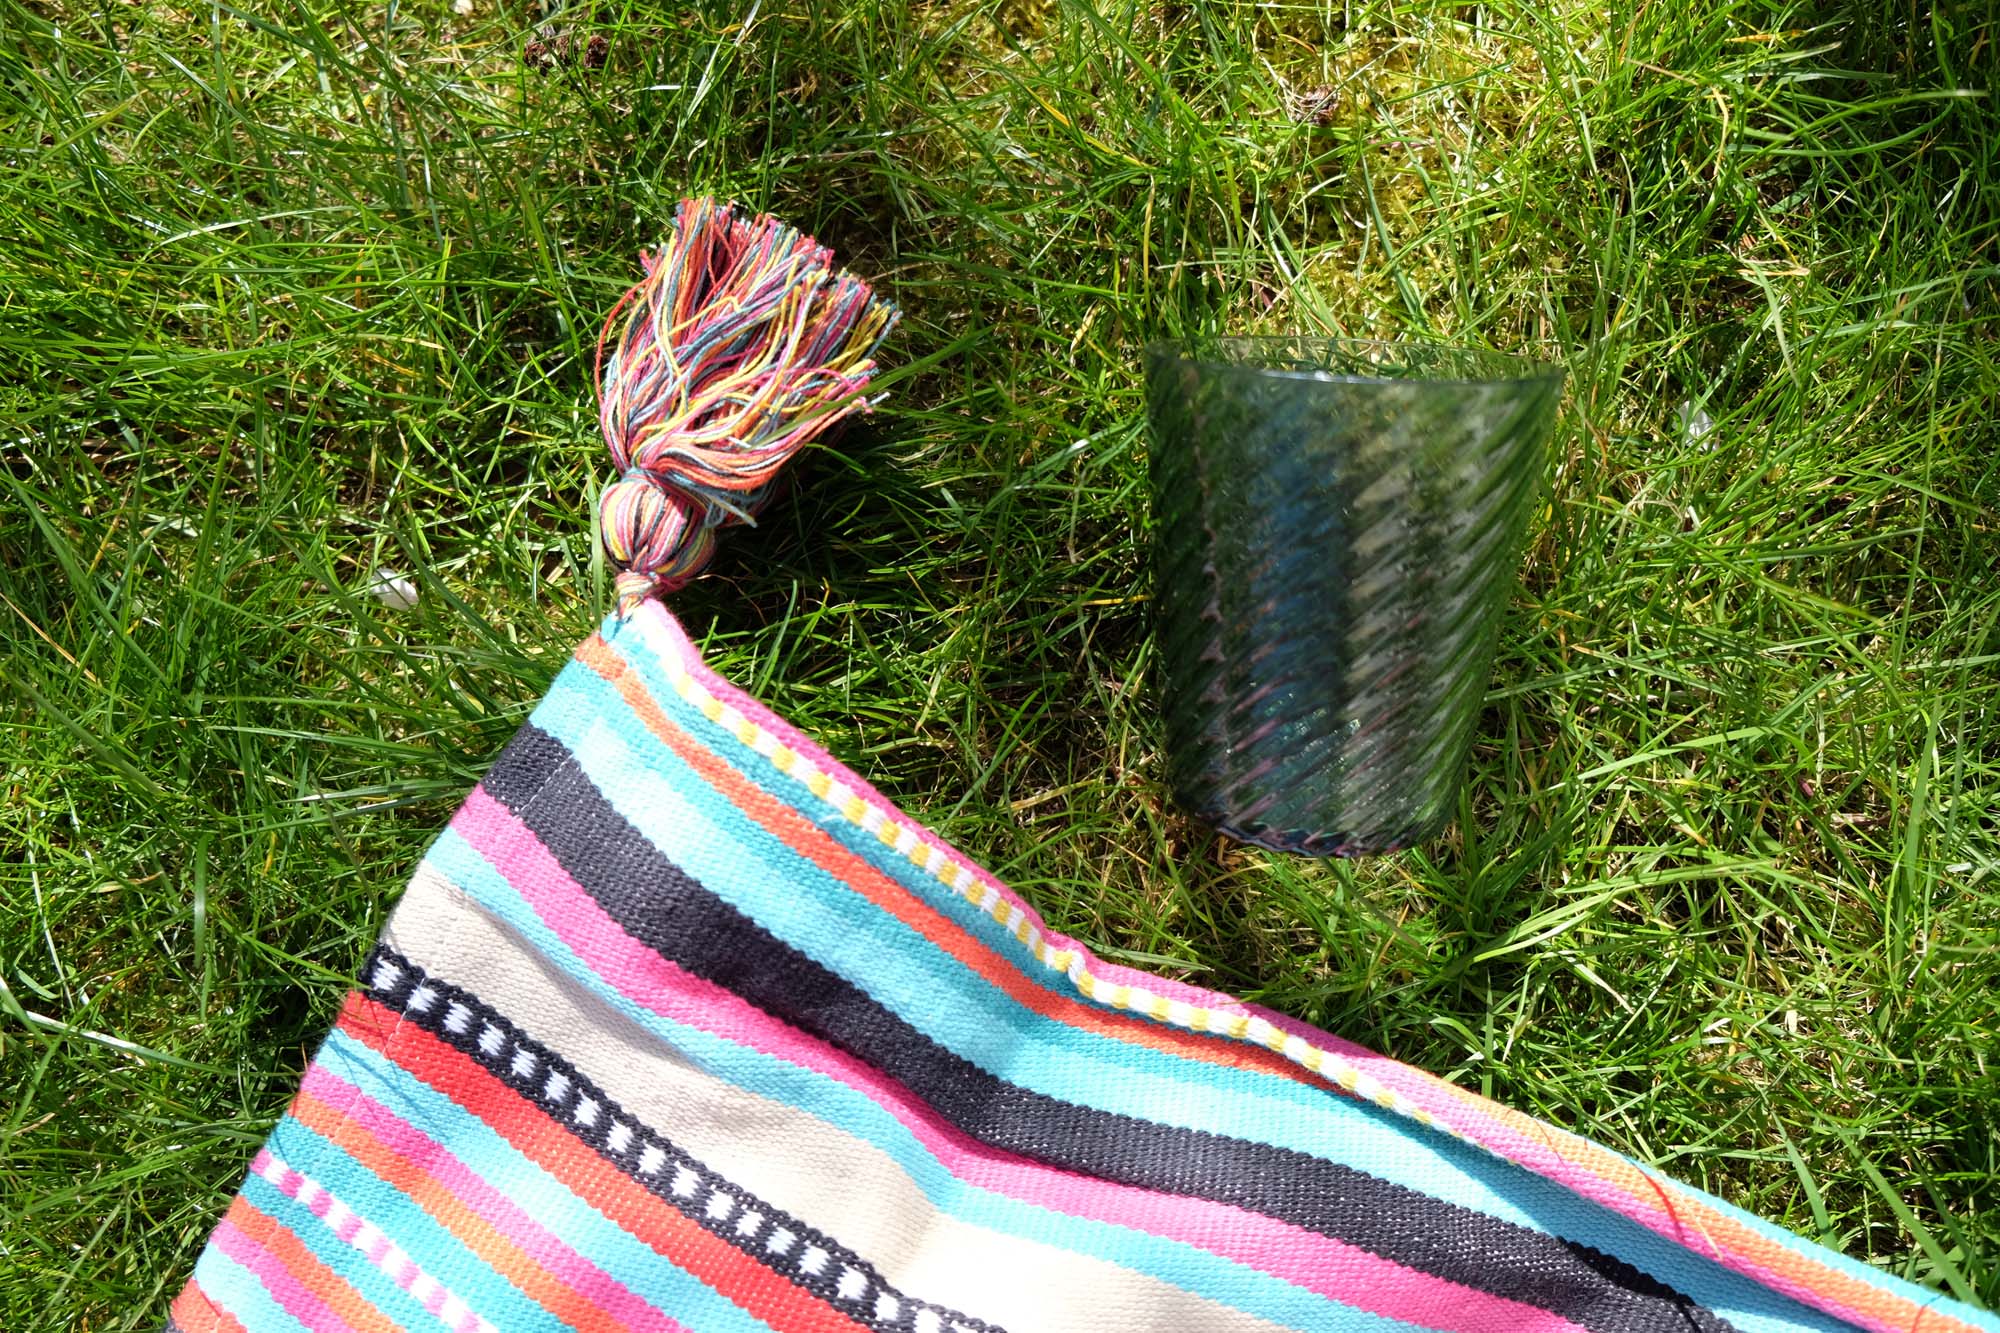 M&S picnic blanket in The Pink House's garden